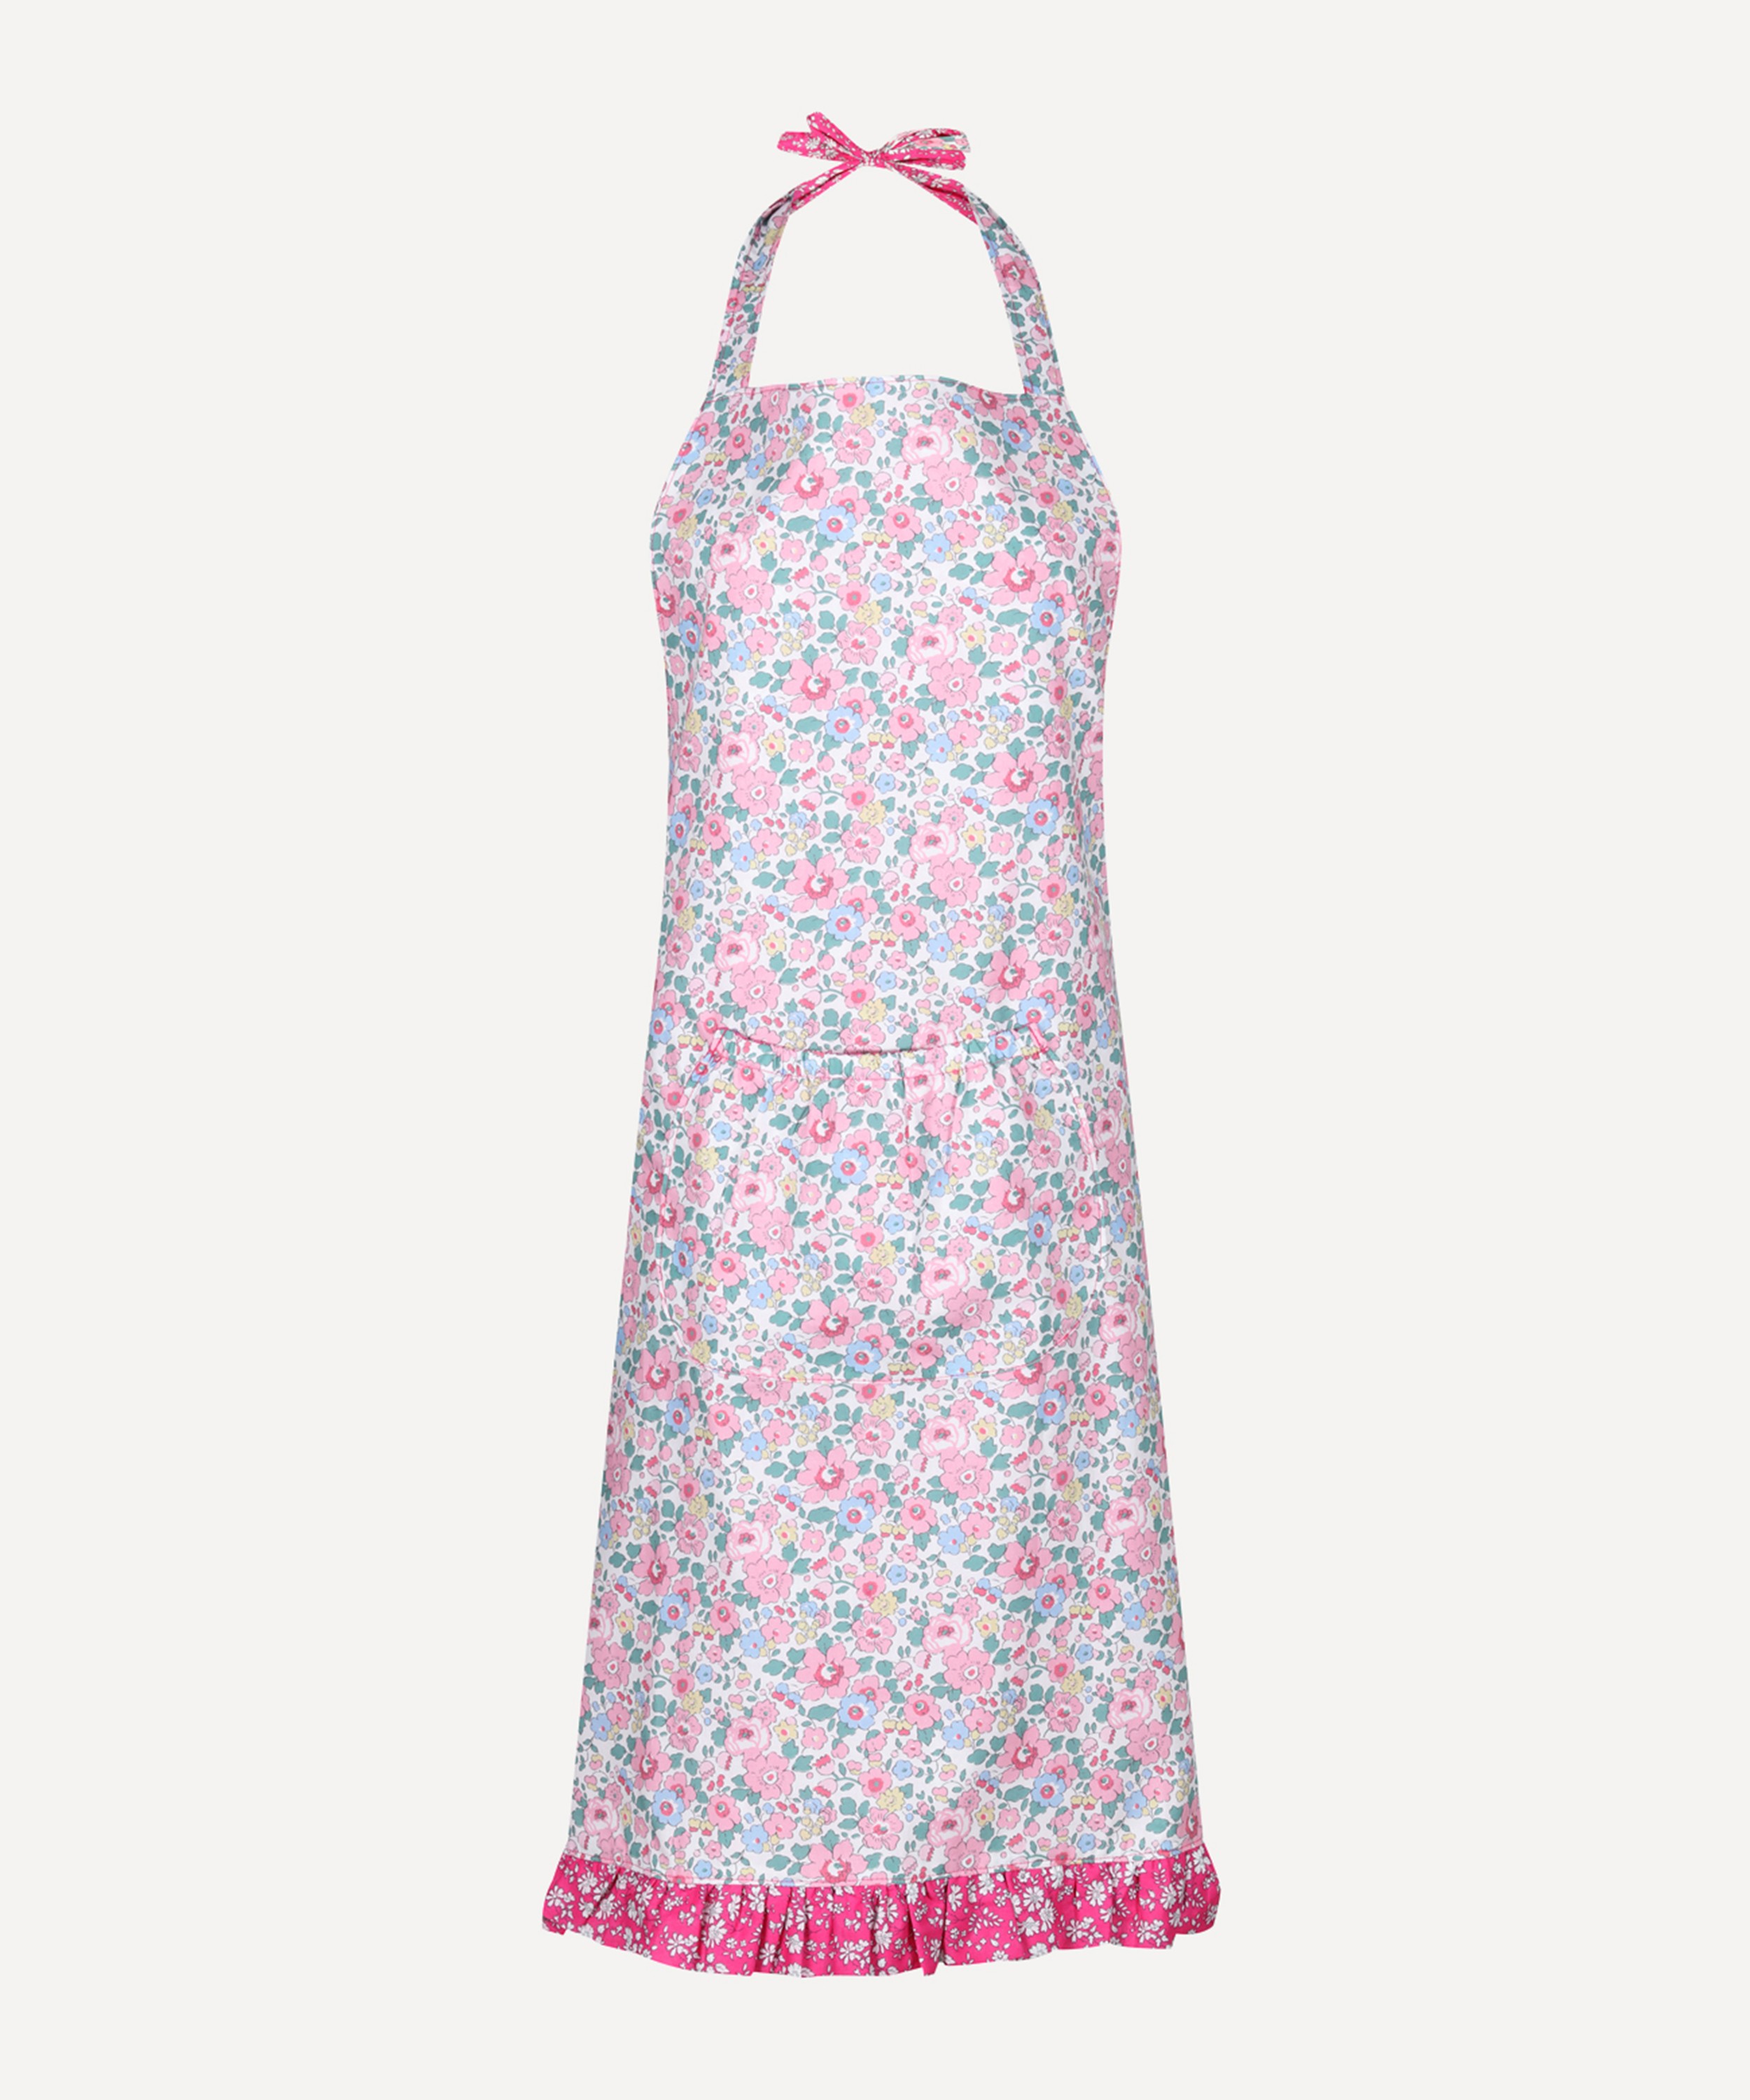 Coco & Wolf - Betsy and Capel Reversible Apron